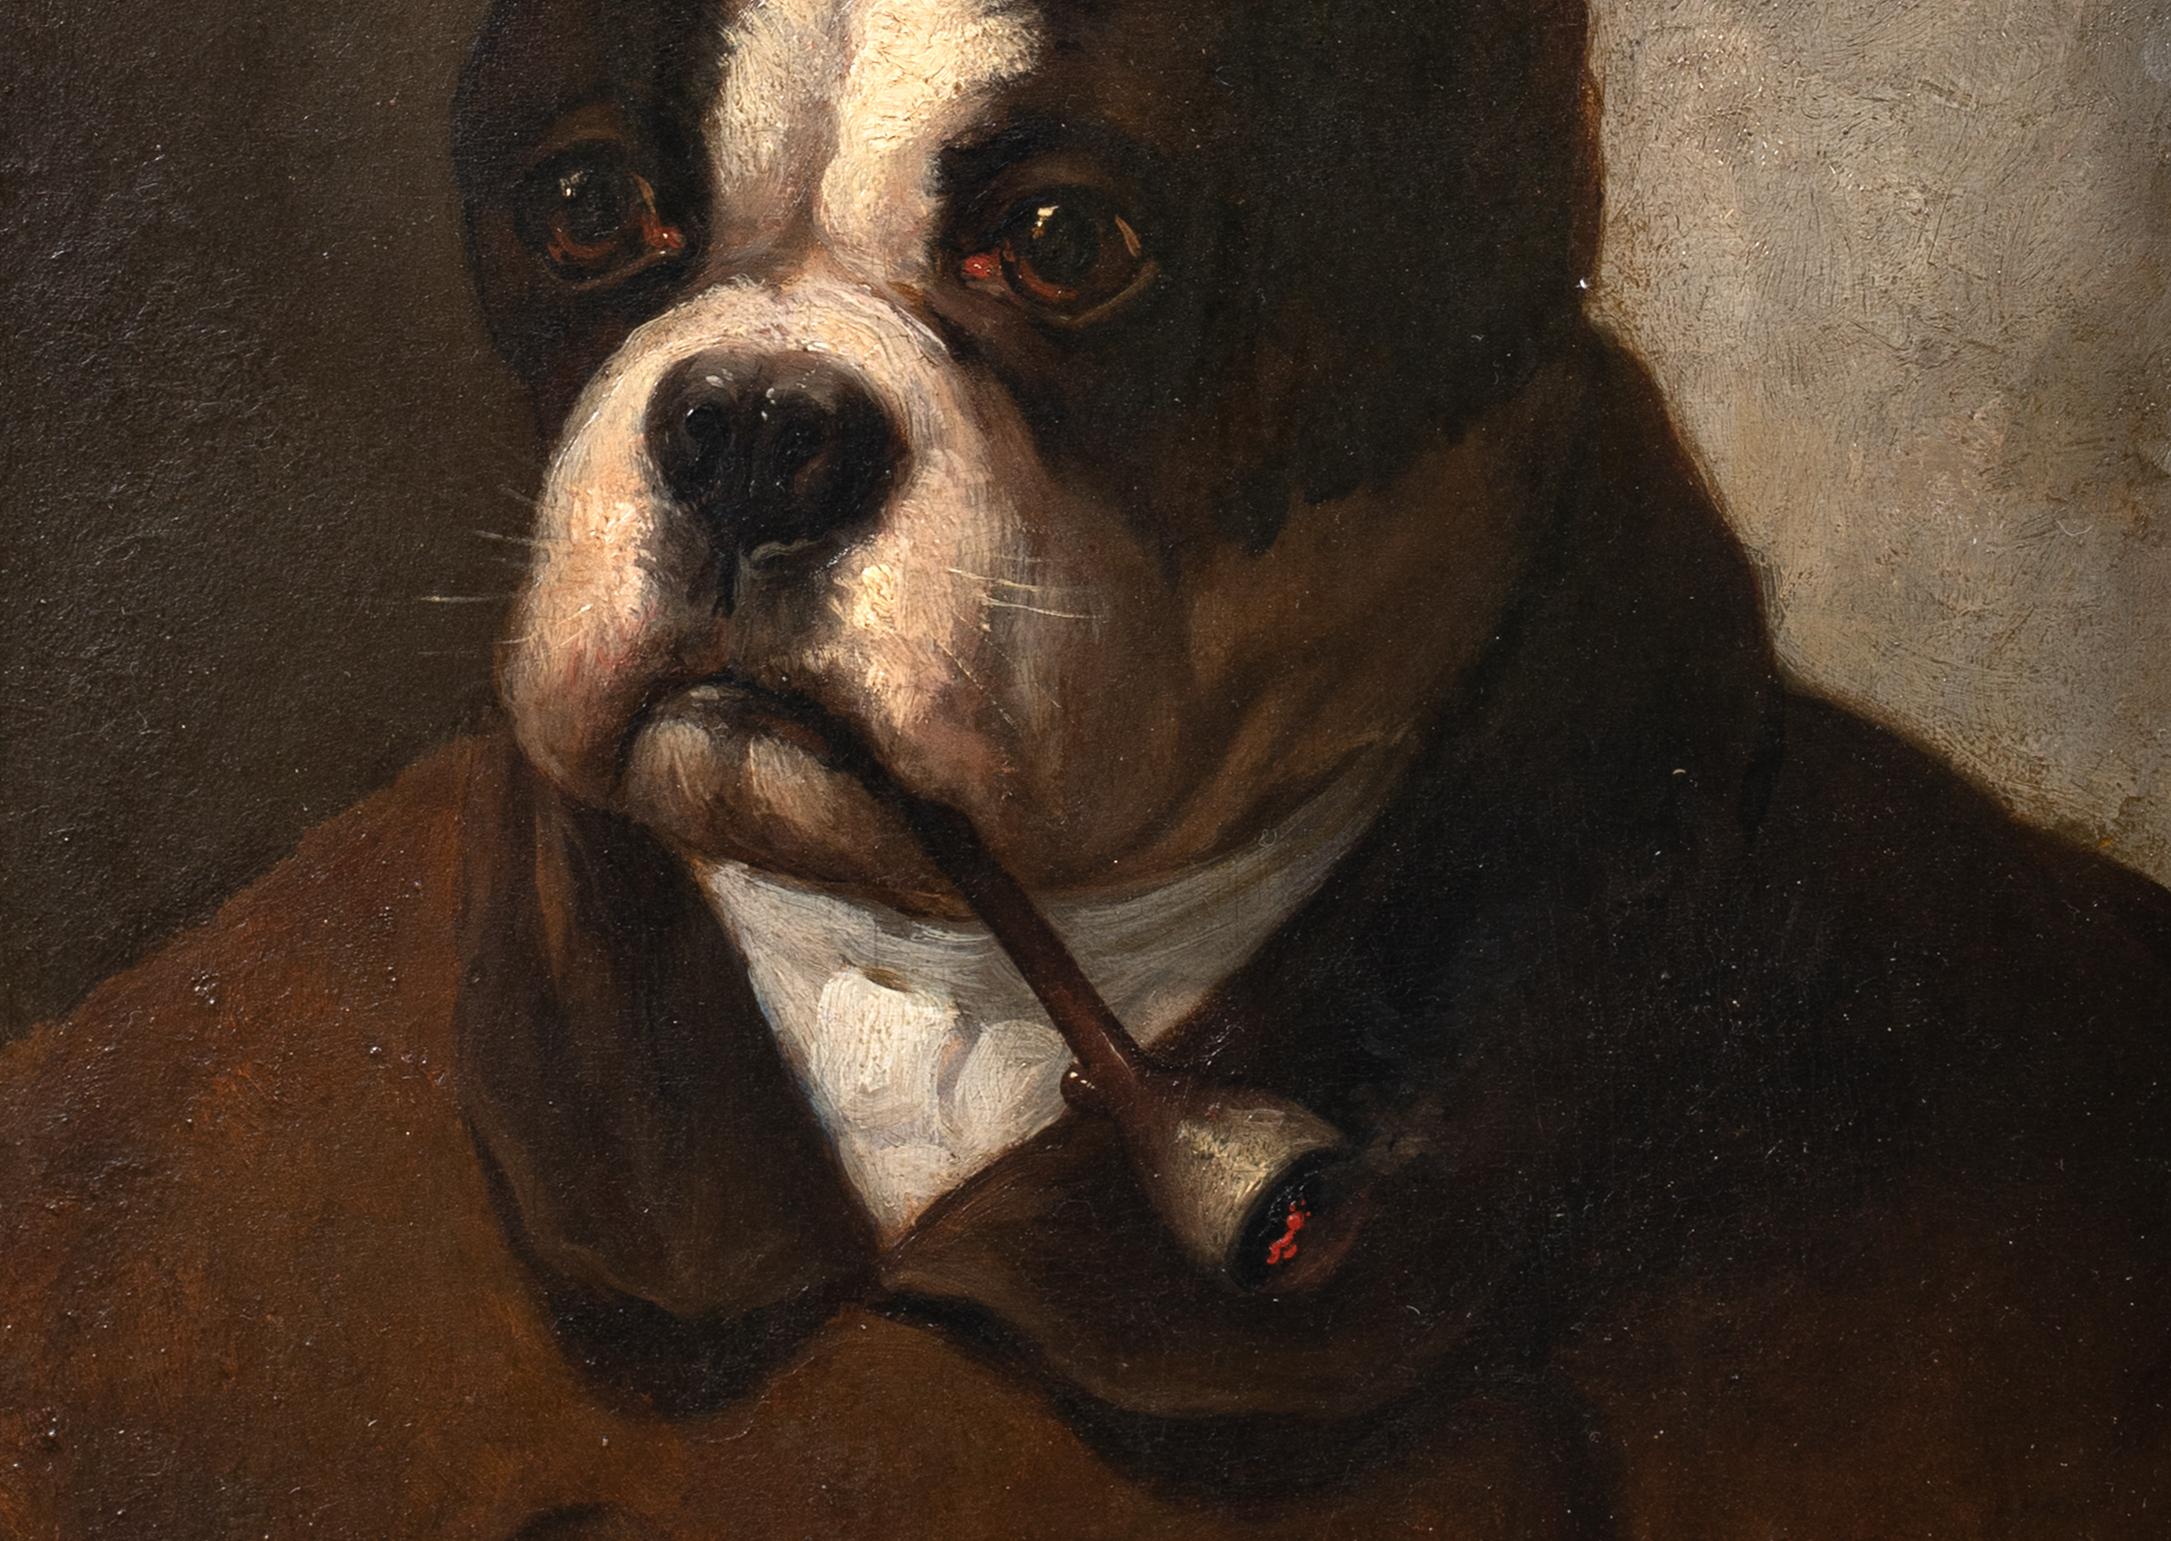 Portrait of An American Bulldog Smoking A Pipe, 19th Century

by Edmond Van Der Meulen (1841-1905) - one of a pair

19th Century Portrait of an American Bulldog smoking a pipe, oil on panel by Edmond Van Der Meulen. Early important and beautifully